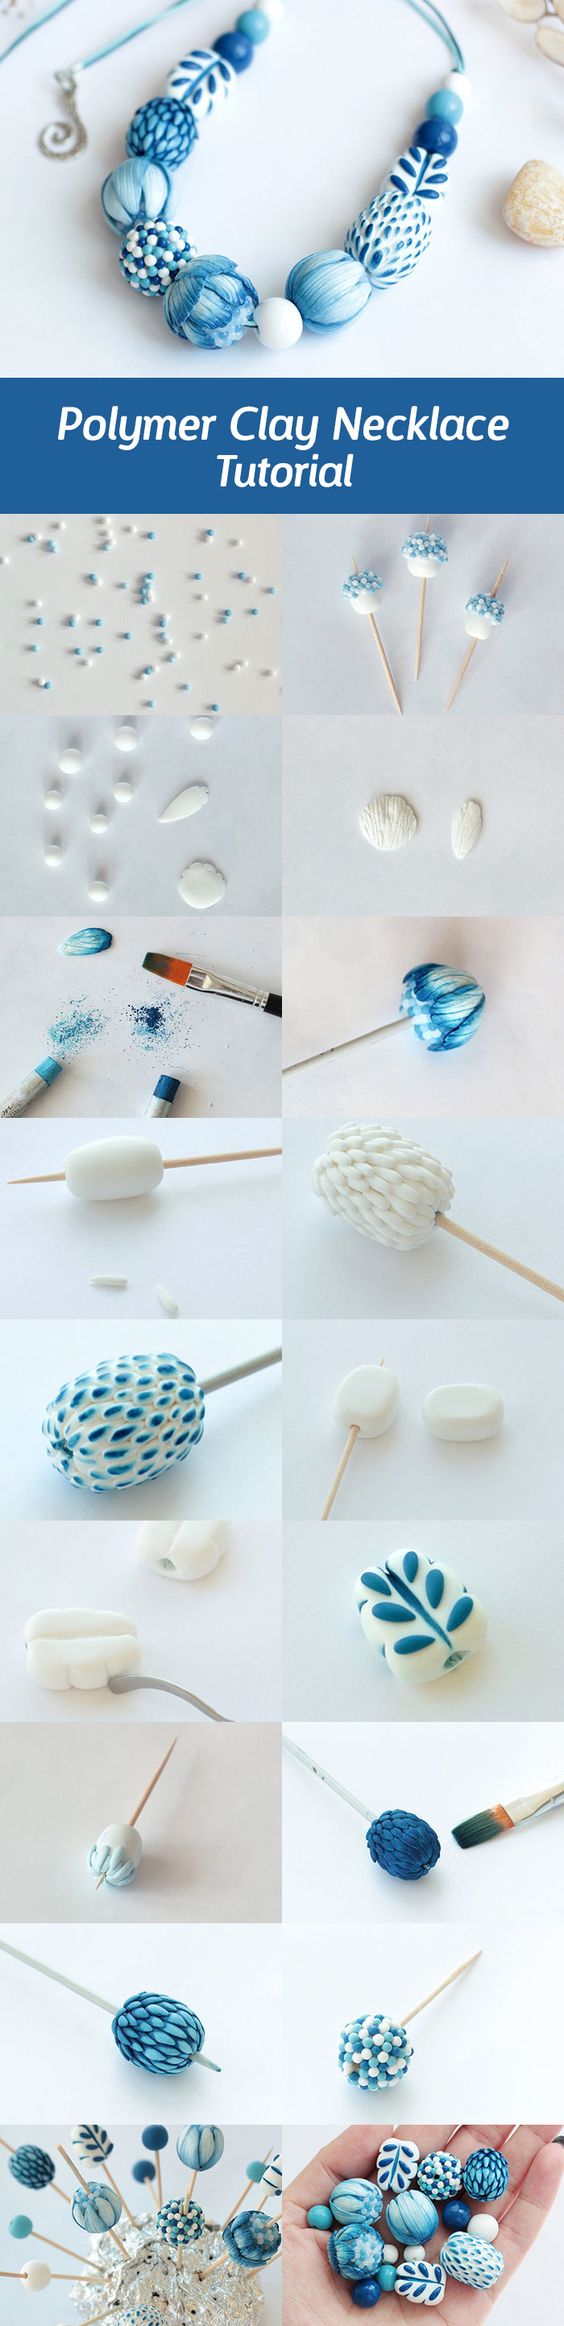 Polymer clay white and blue necklace tutorial - DIY step by step